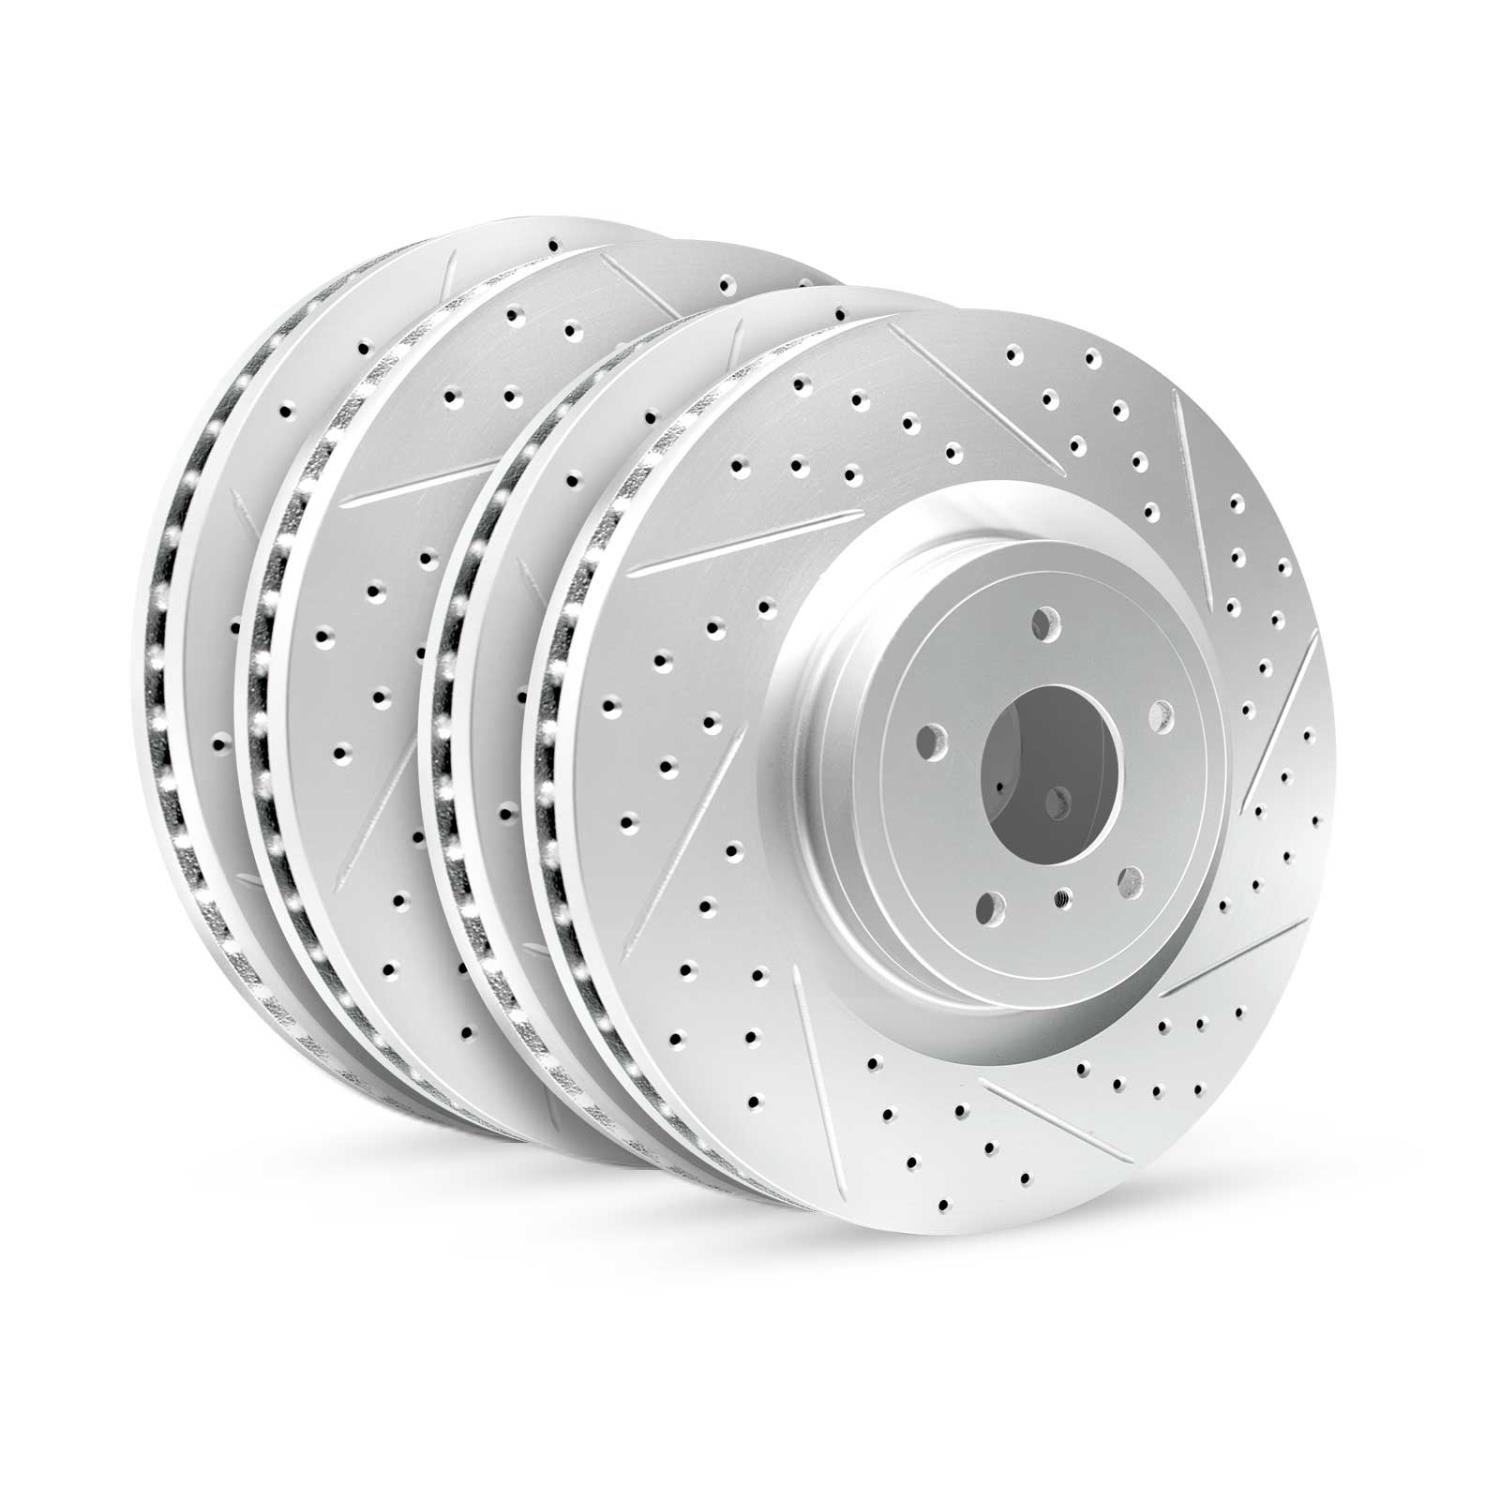 GEO-Carbon Drilled/Slotted Rotors, 2006-2012 Mercedes-Benz,